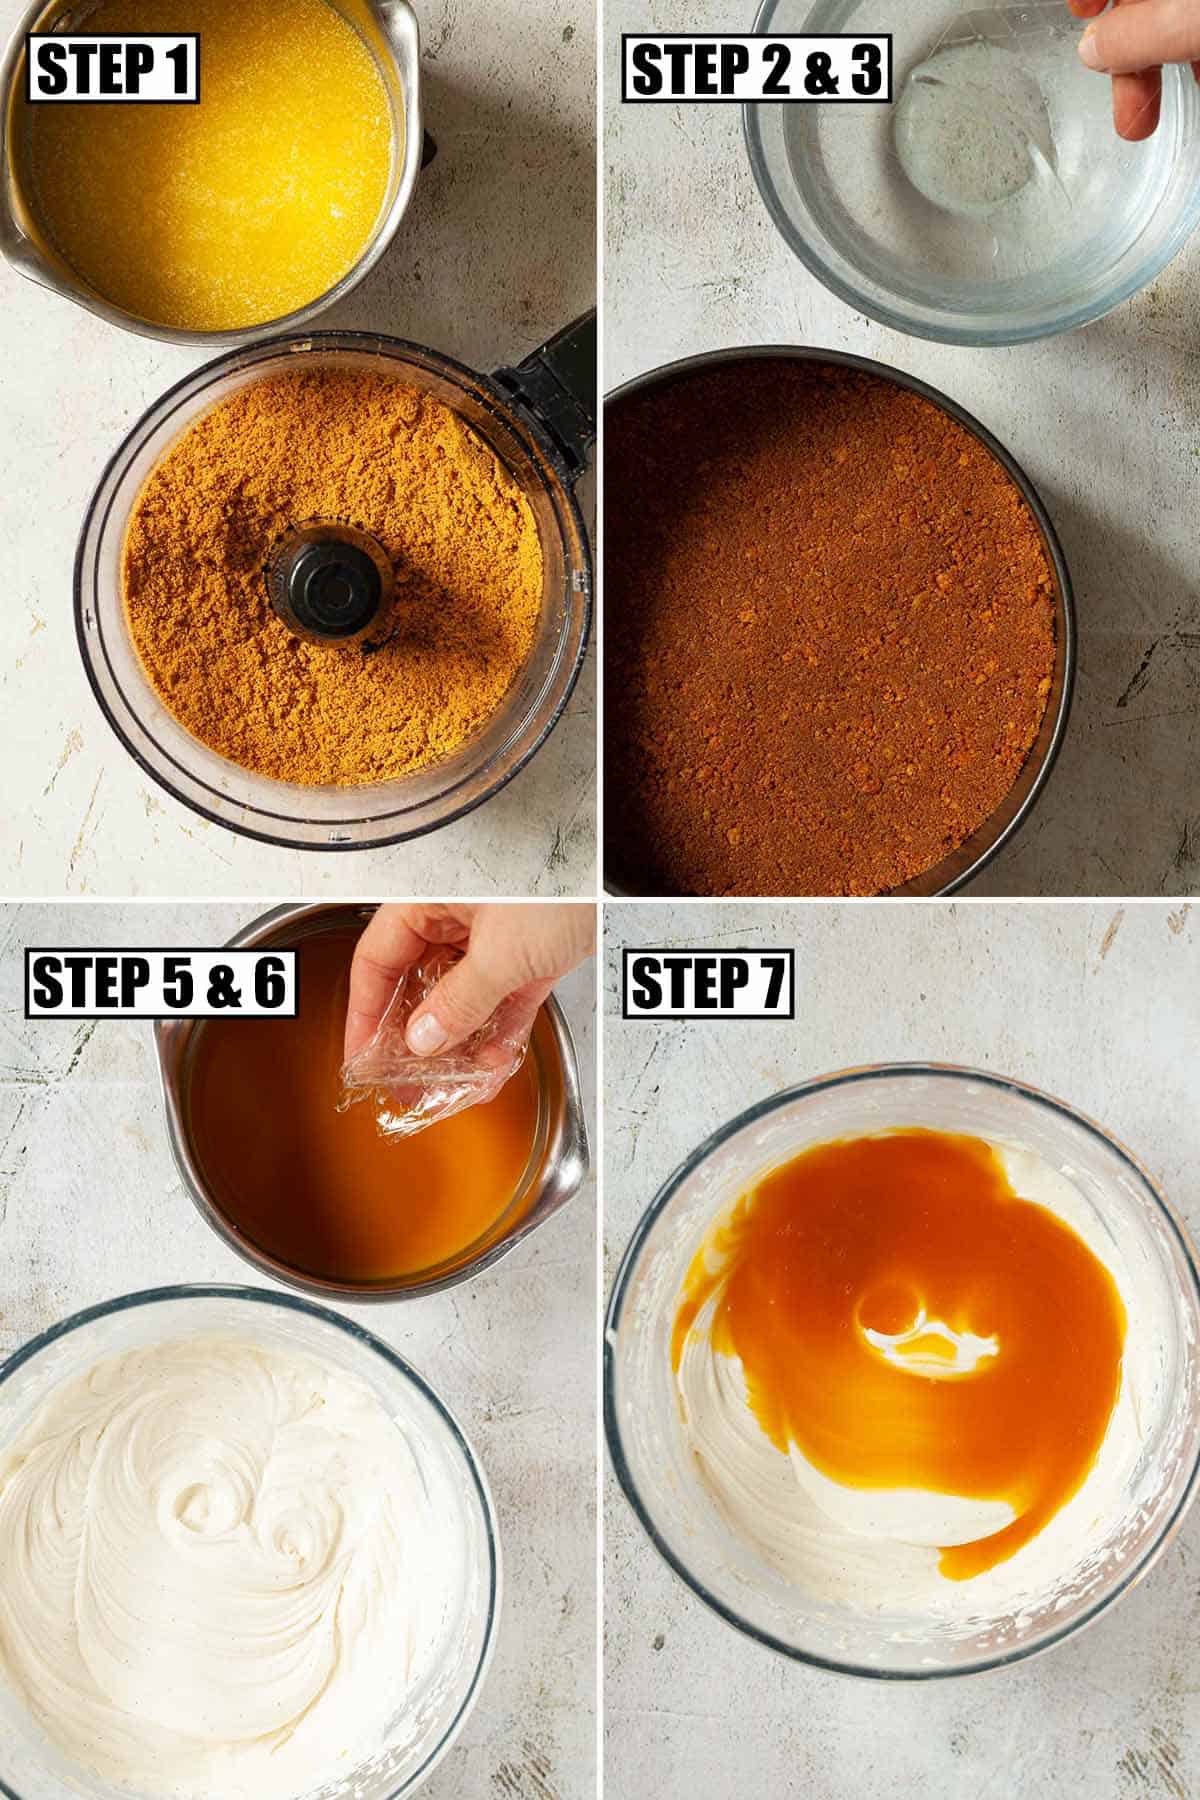 Collage of images showing a tropical creamy dessert being made.